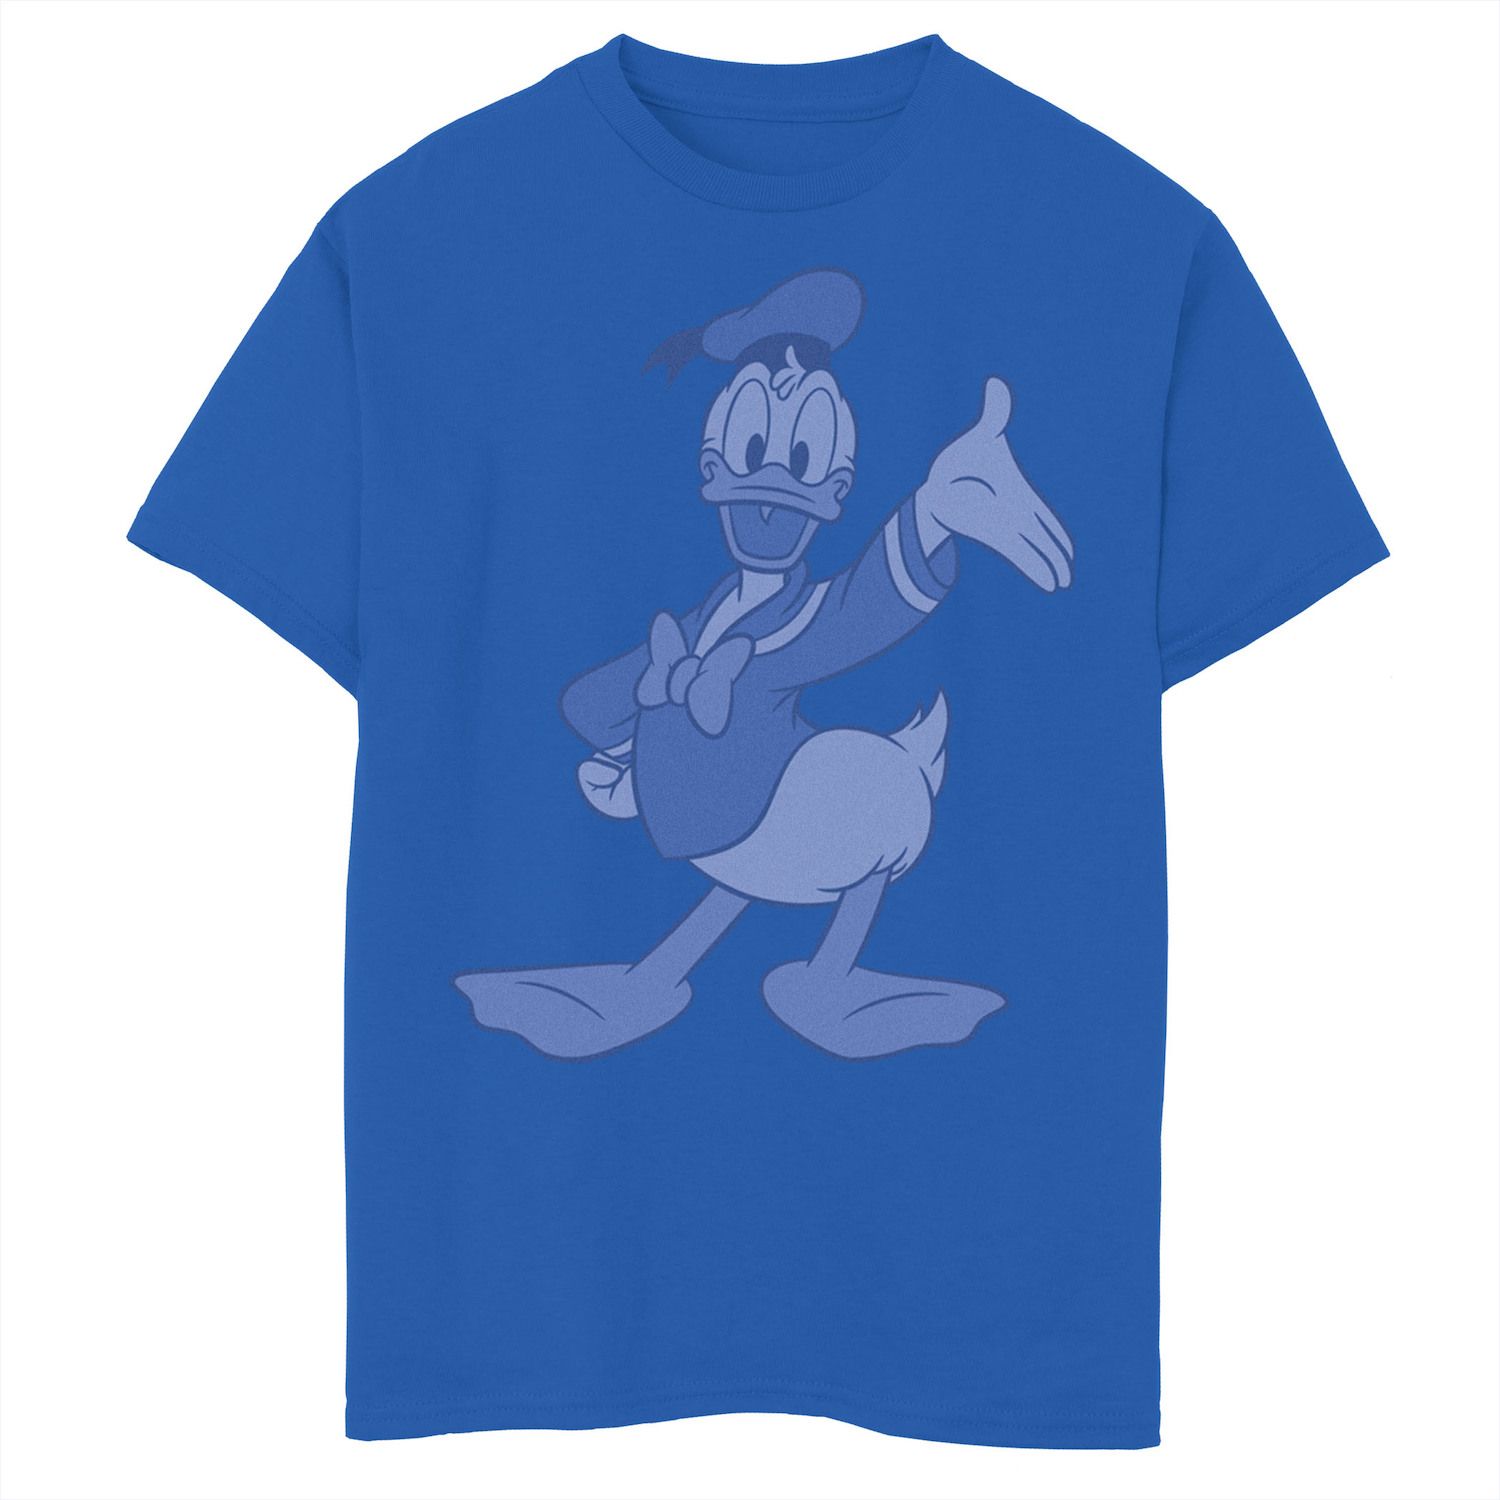 Image for Disney 's Donald Duck Boys 8-20 Blue Hue Stance Portrait Graphic Tee at Kohl's.